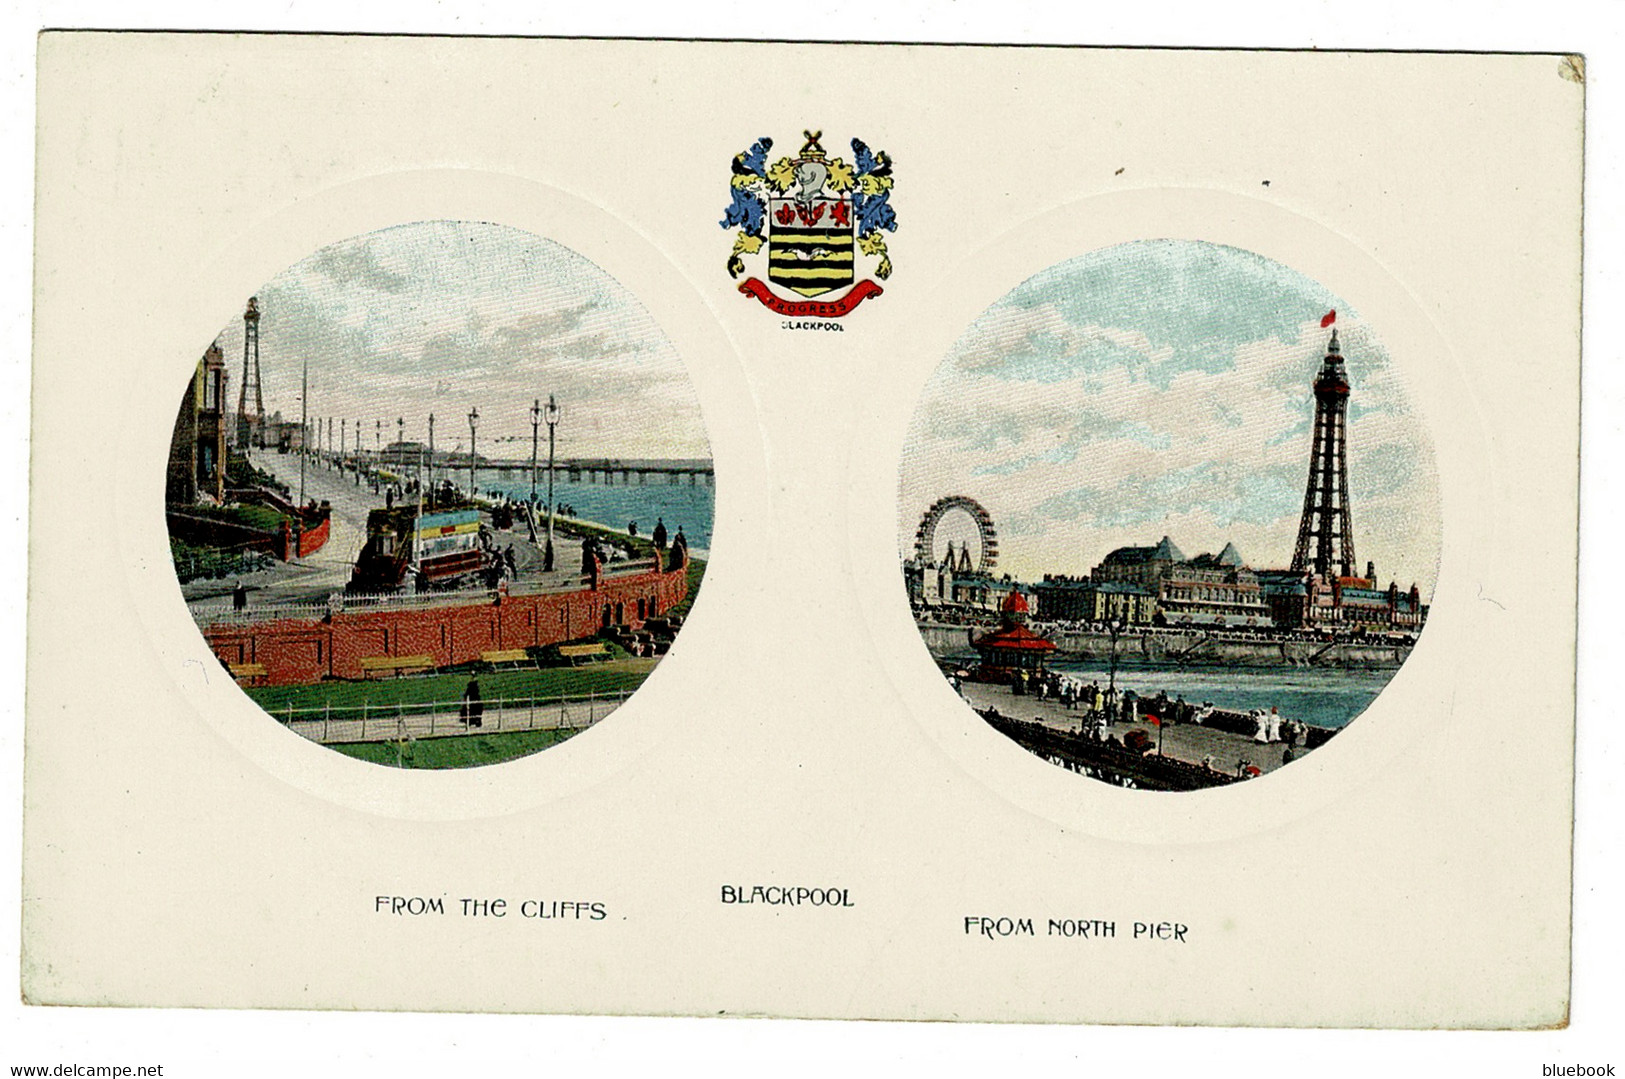 Ref 1406 - 1908 Double View Postcard - Blackpool Lancashire - From Cliffs & From North Pier - Blackpool